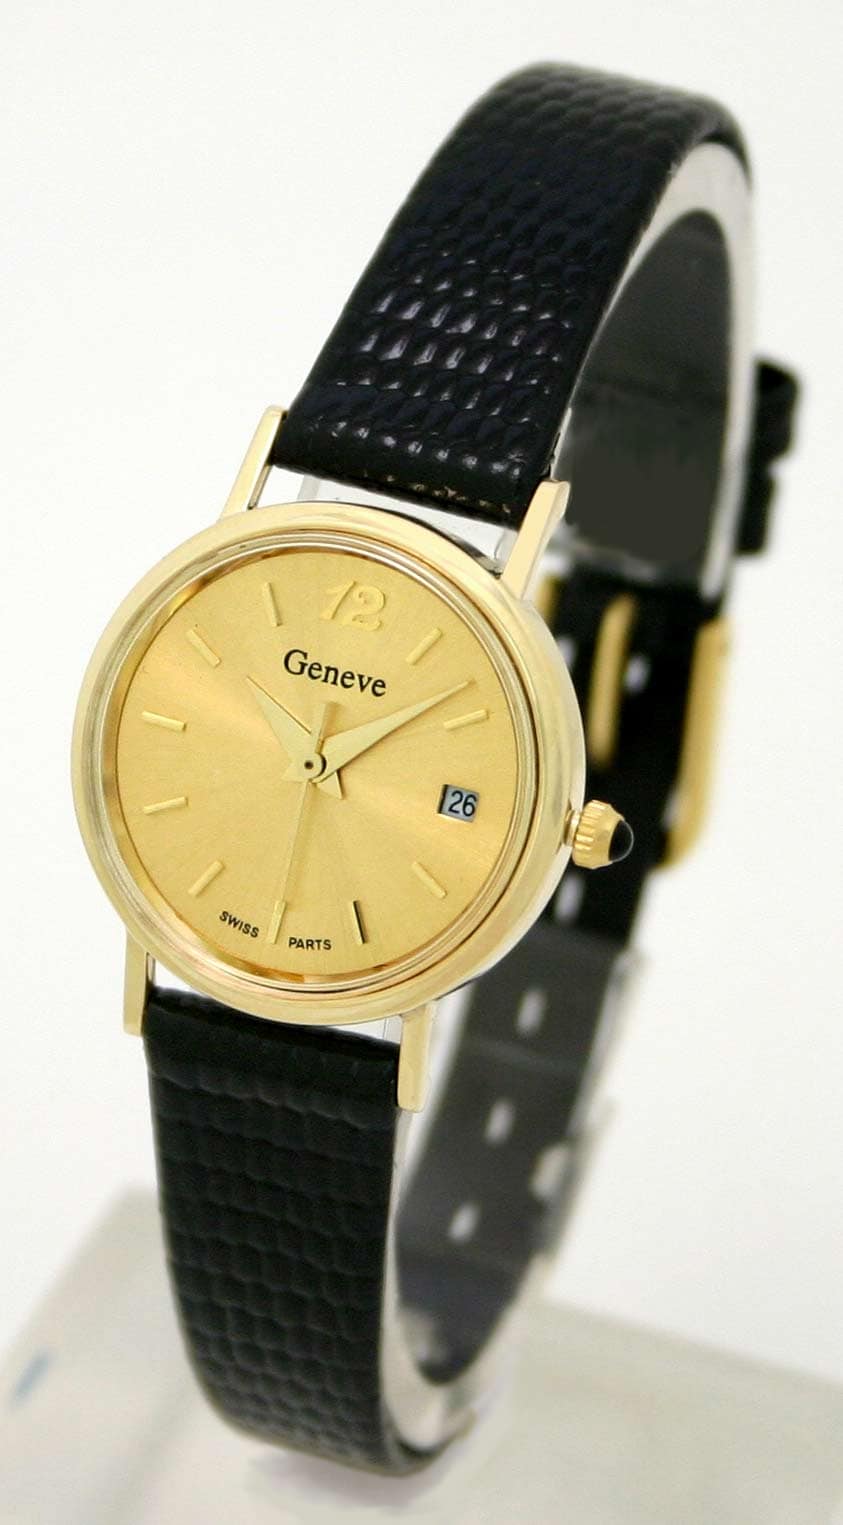 Geneve 14k Gold Women's Leather Strap Watch - Free Shipping Today - Overstock.com - 11030170